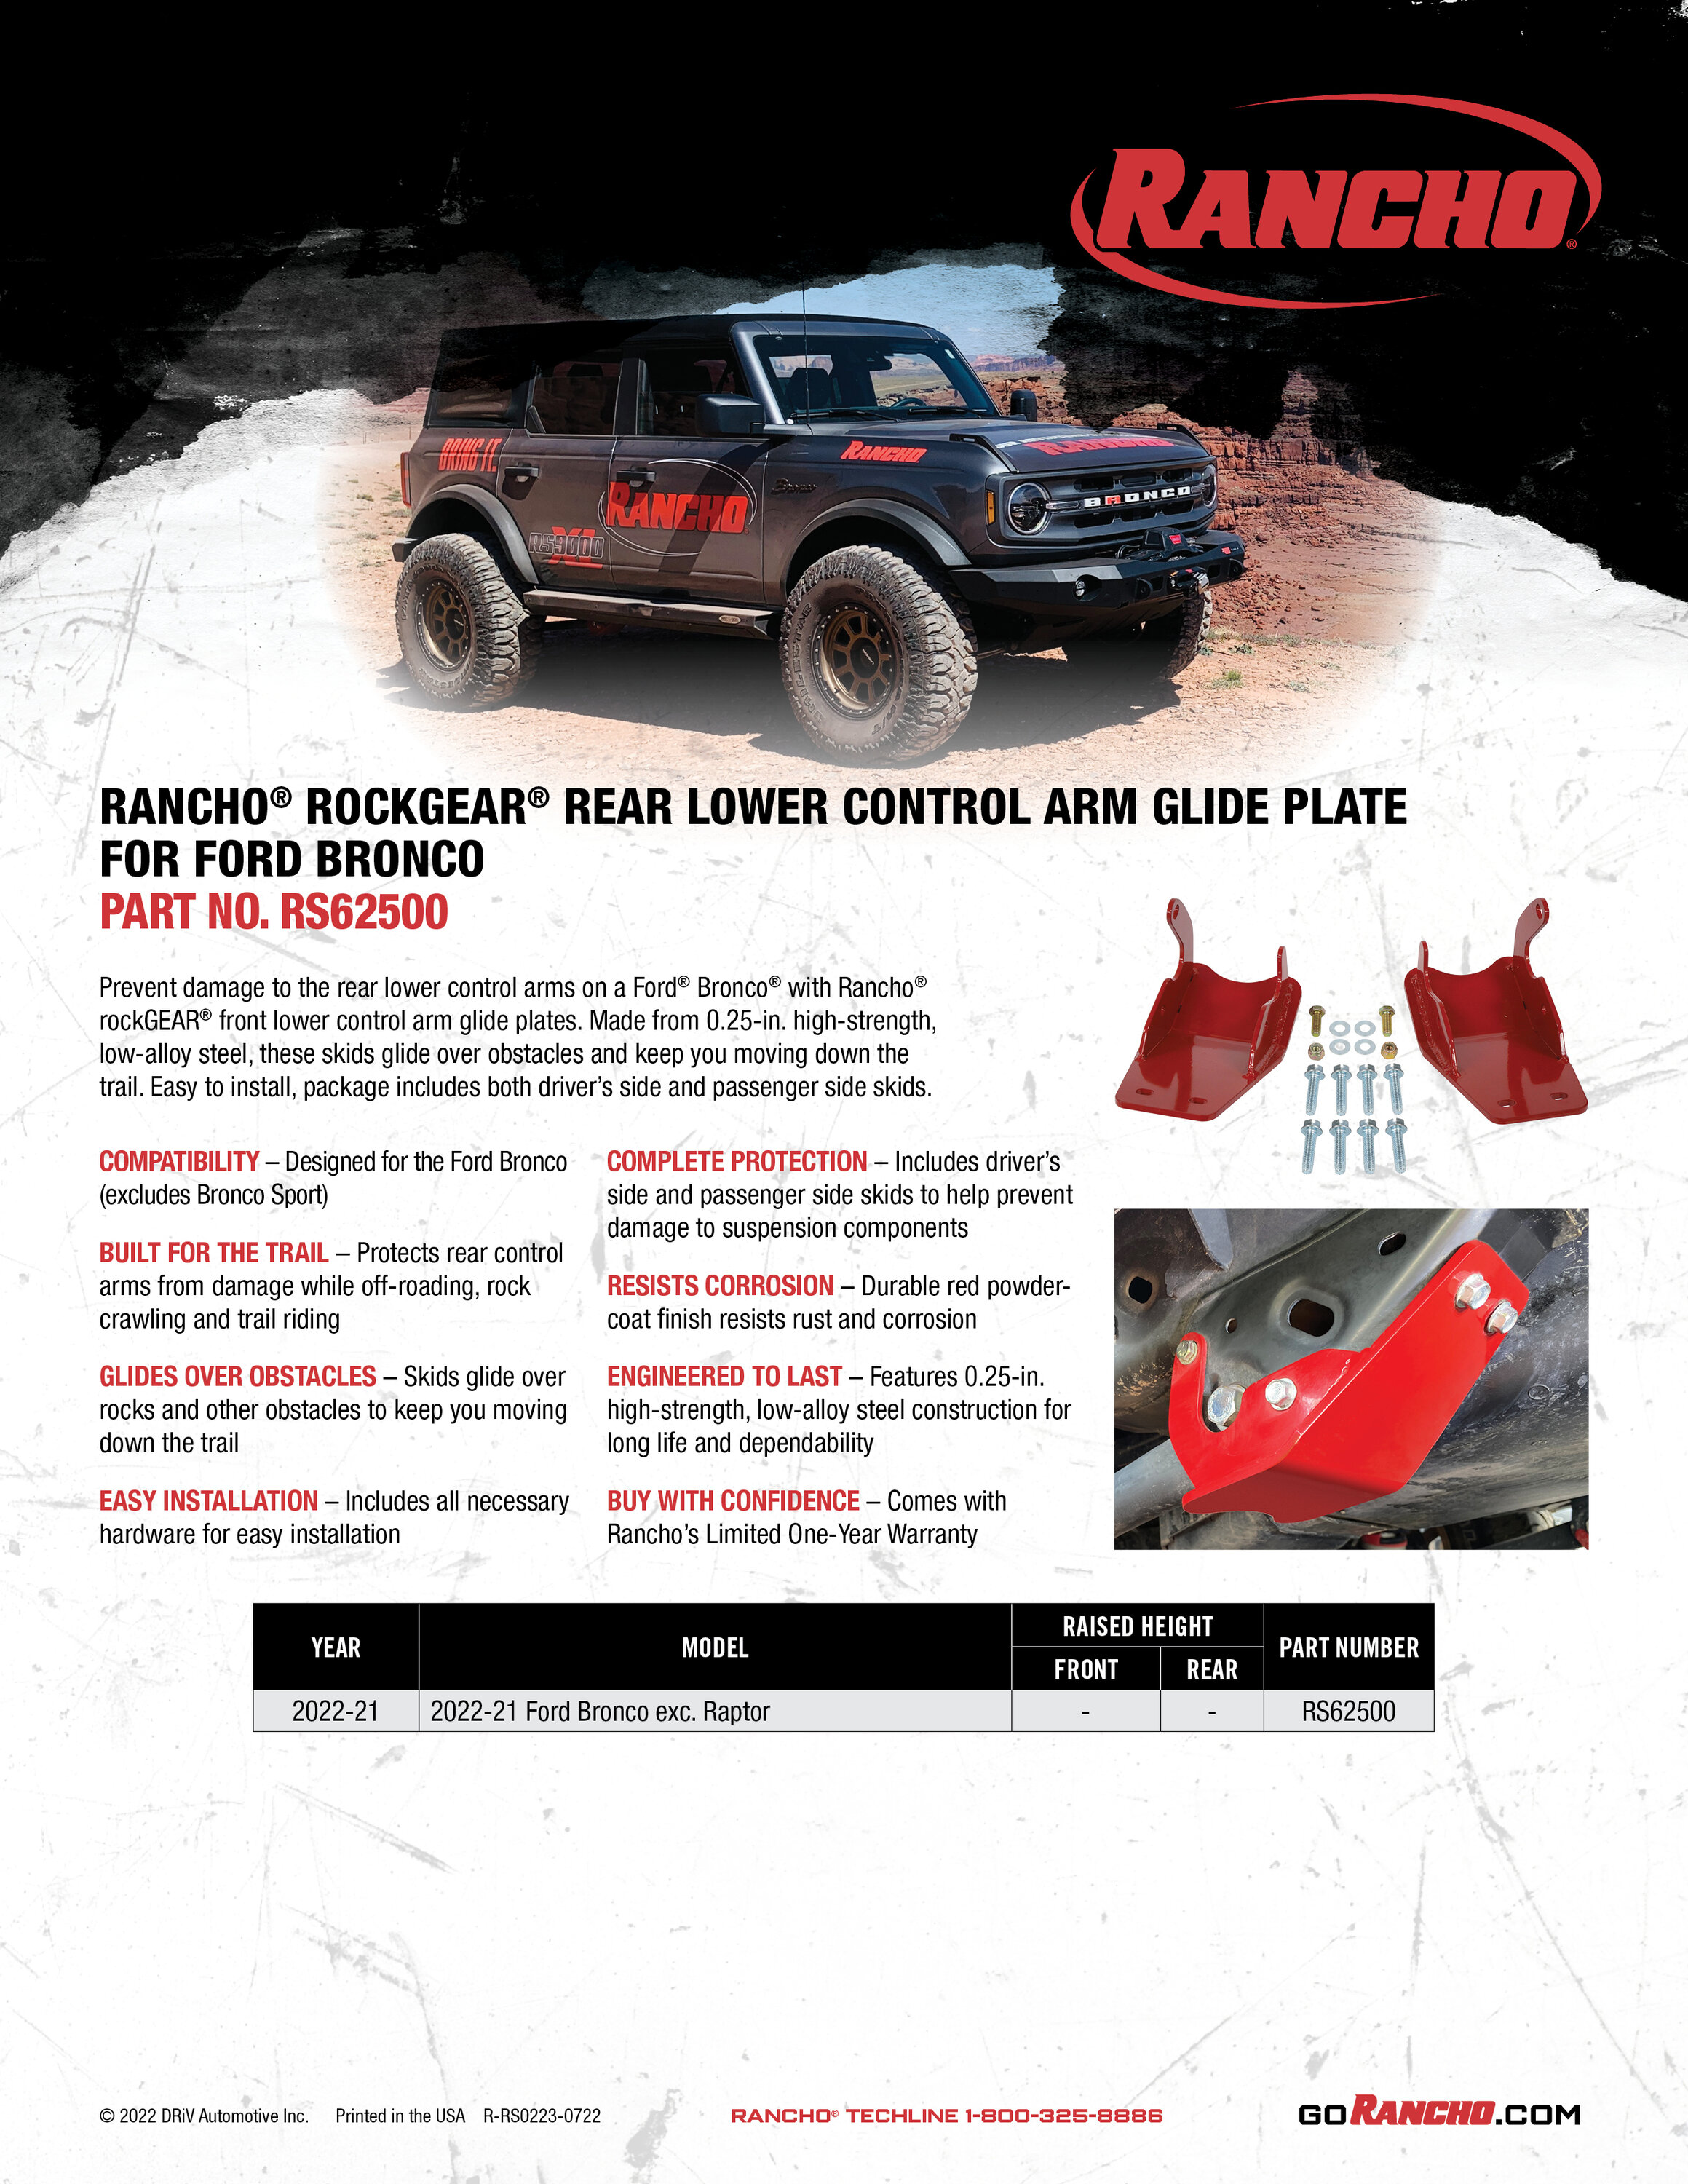 Ford Bronco Get your Rancho rockGEAR here!! 22-21 FordBronco_SkidPlate_RS62500_Sell_072522